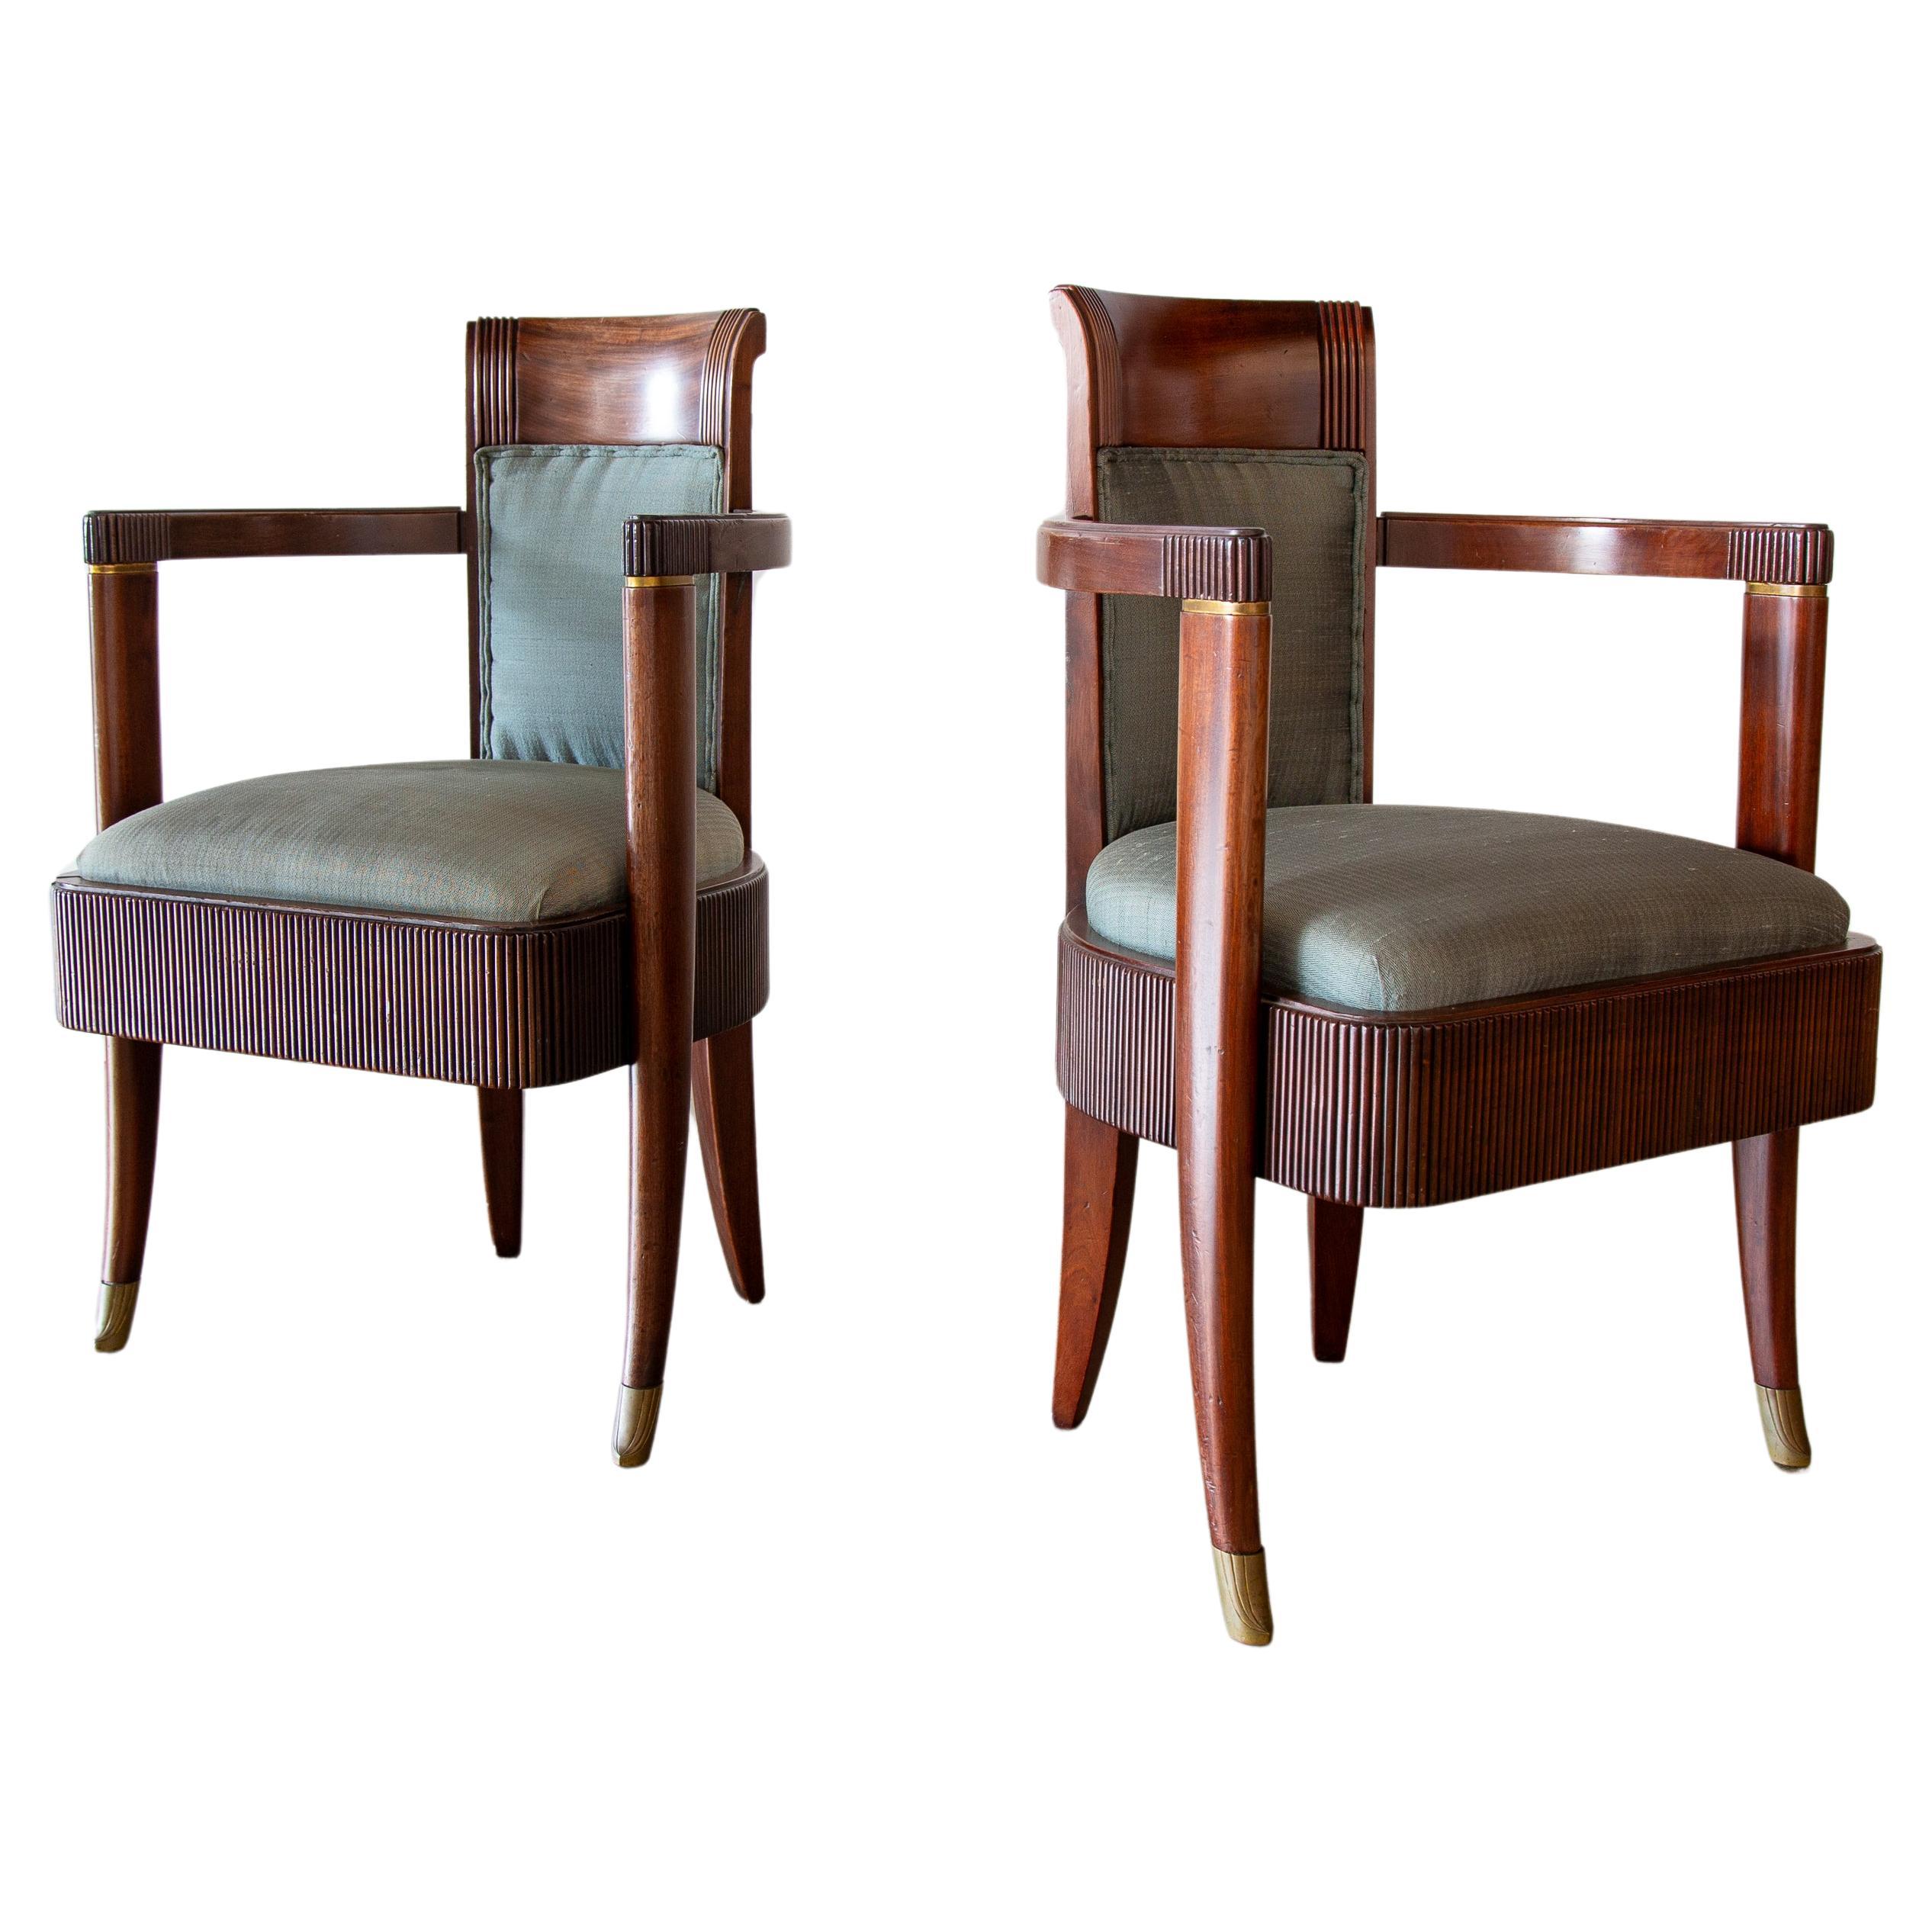 1934 Pierre Patout designed Armchairs for SS Normandie Fluted Mahogany Brass